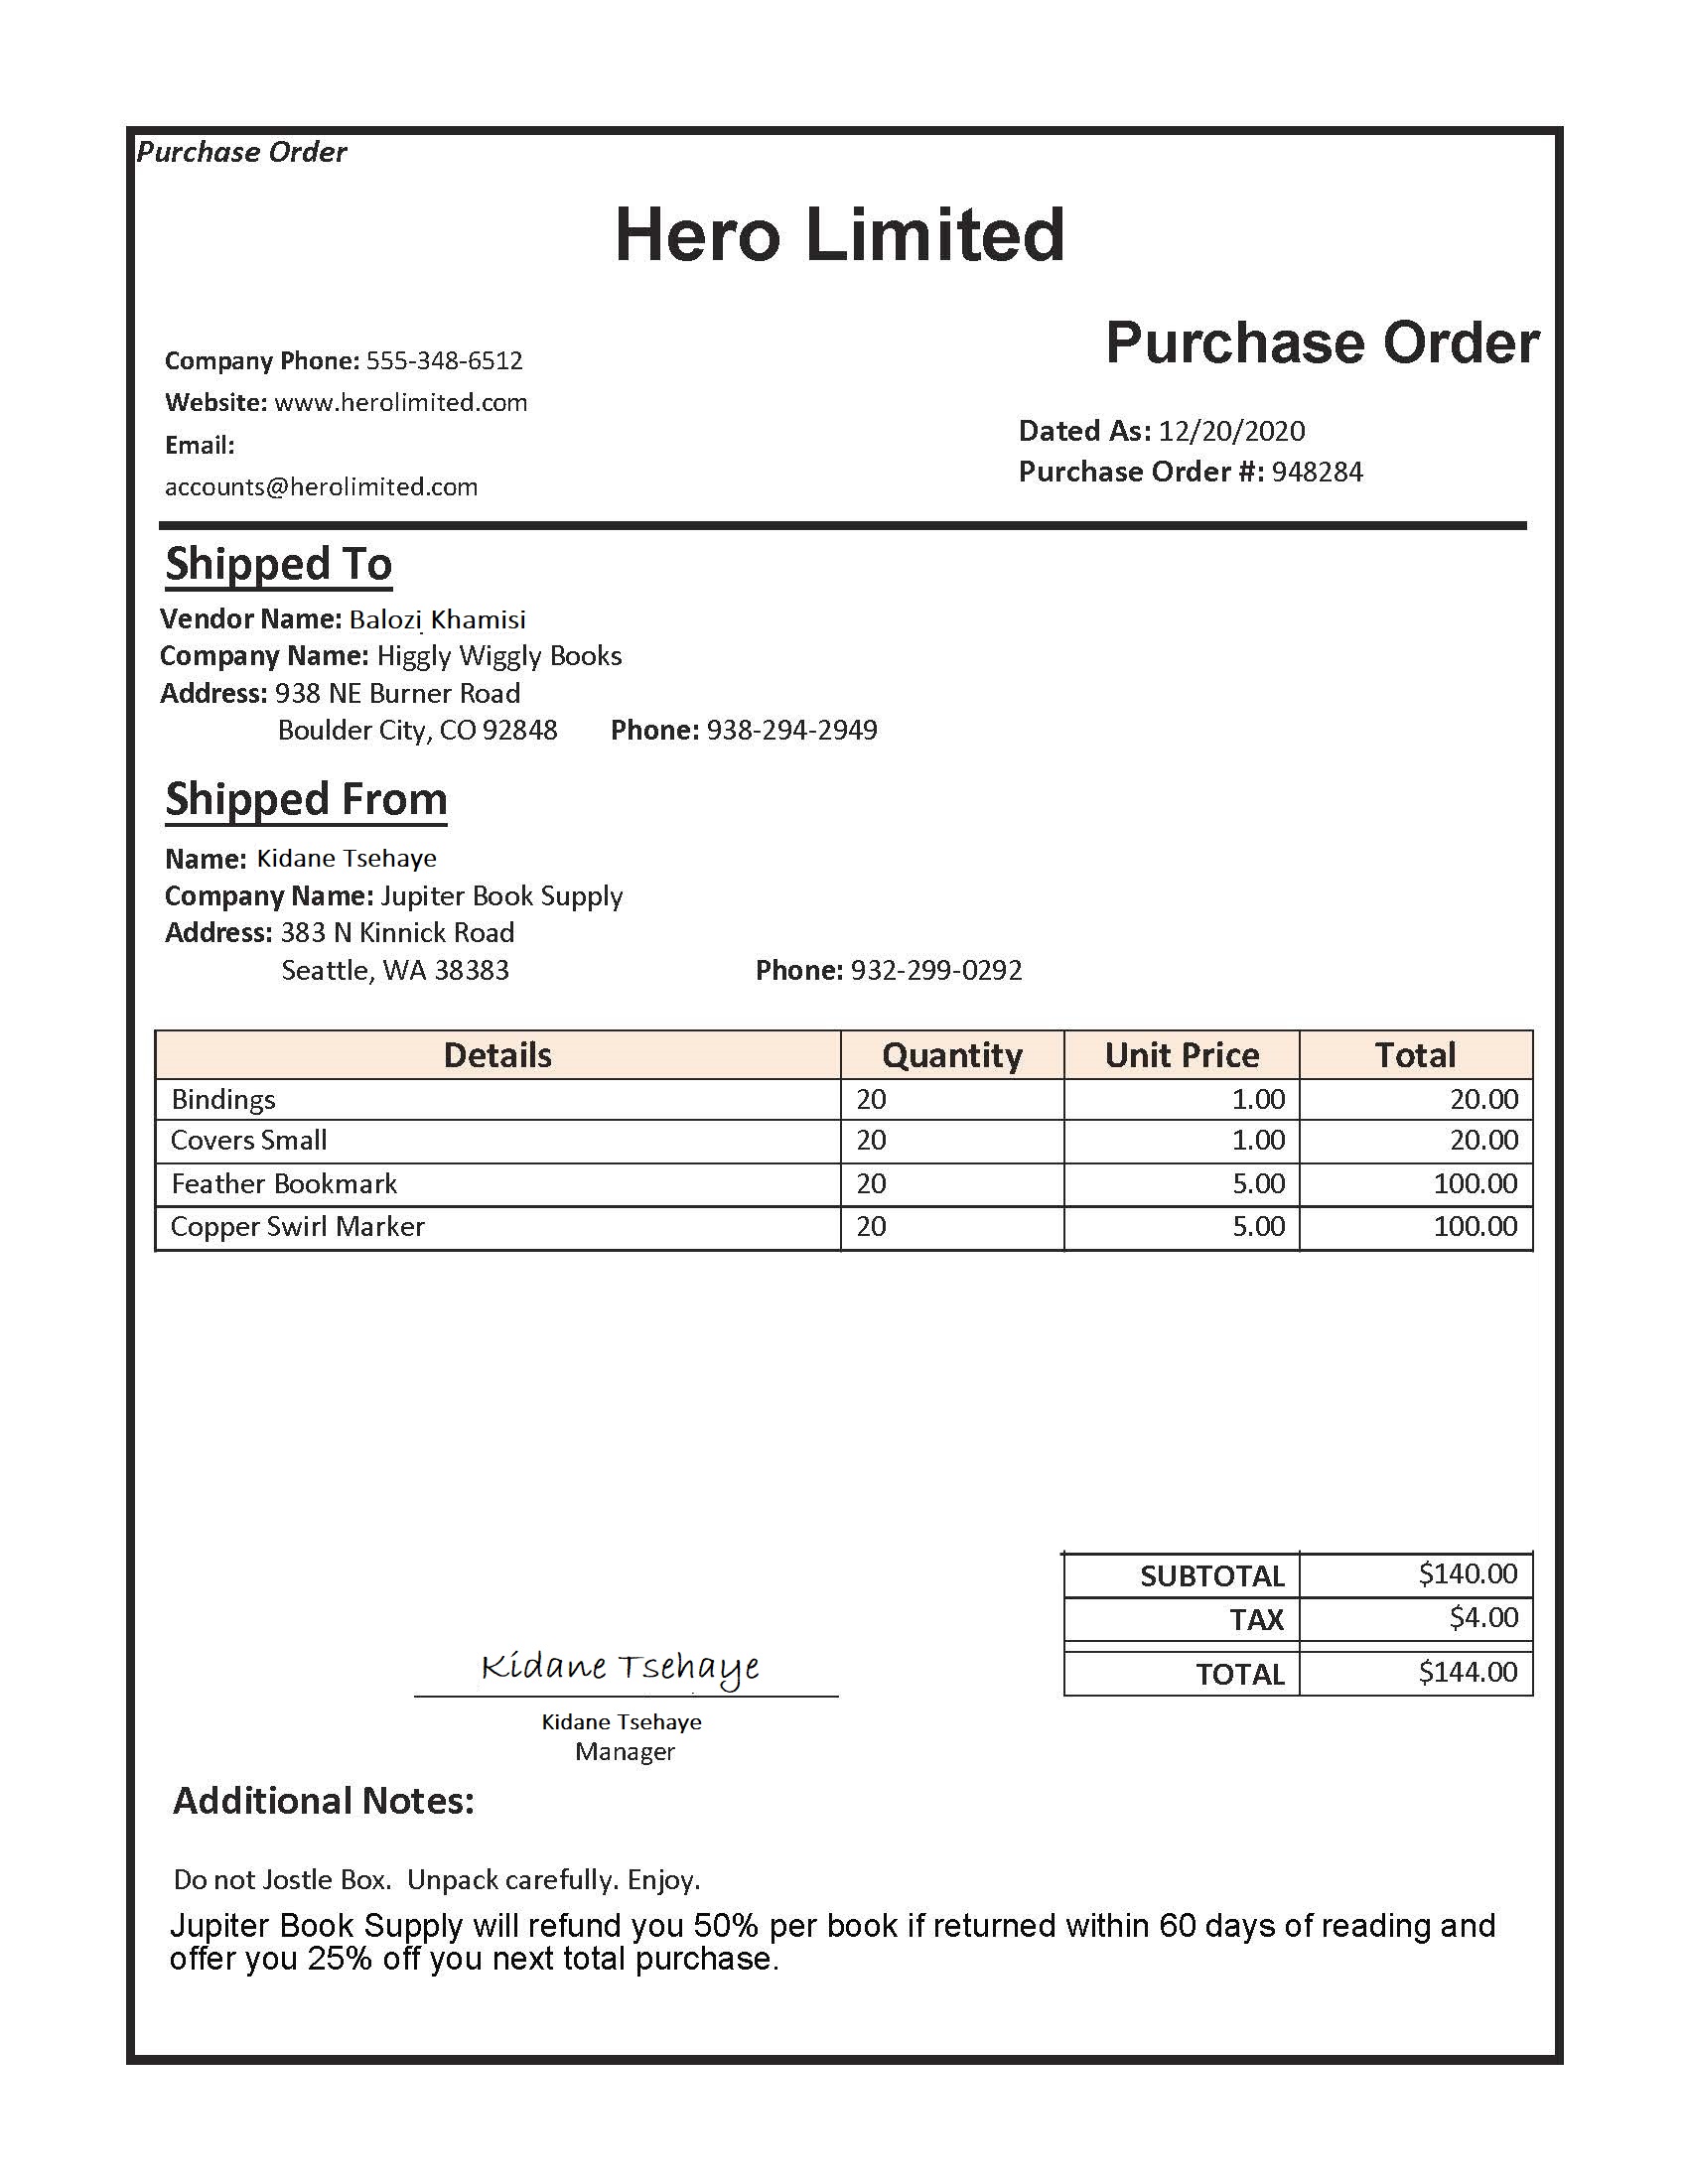 Photograph of an example purchase order.